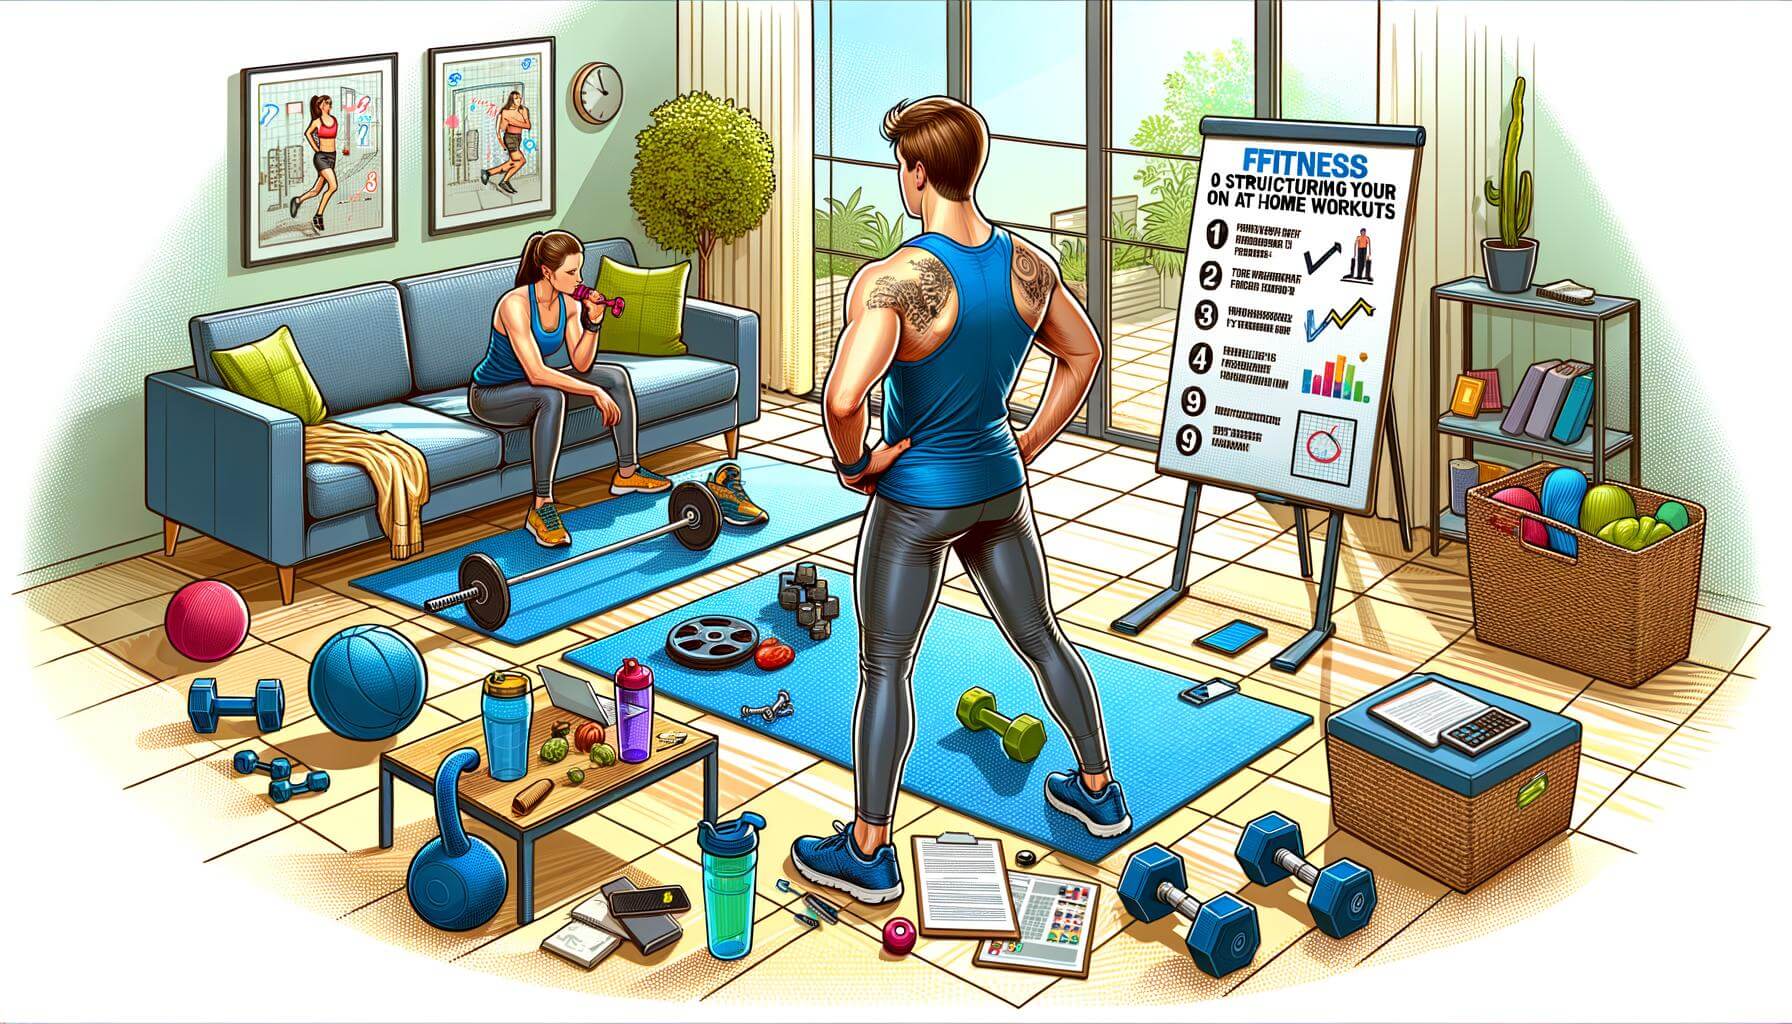 Fitness 9 Tips on Structuring Your At Home Workouts